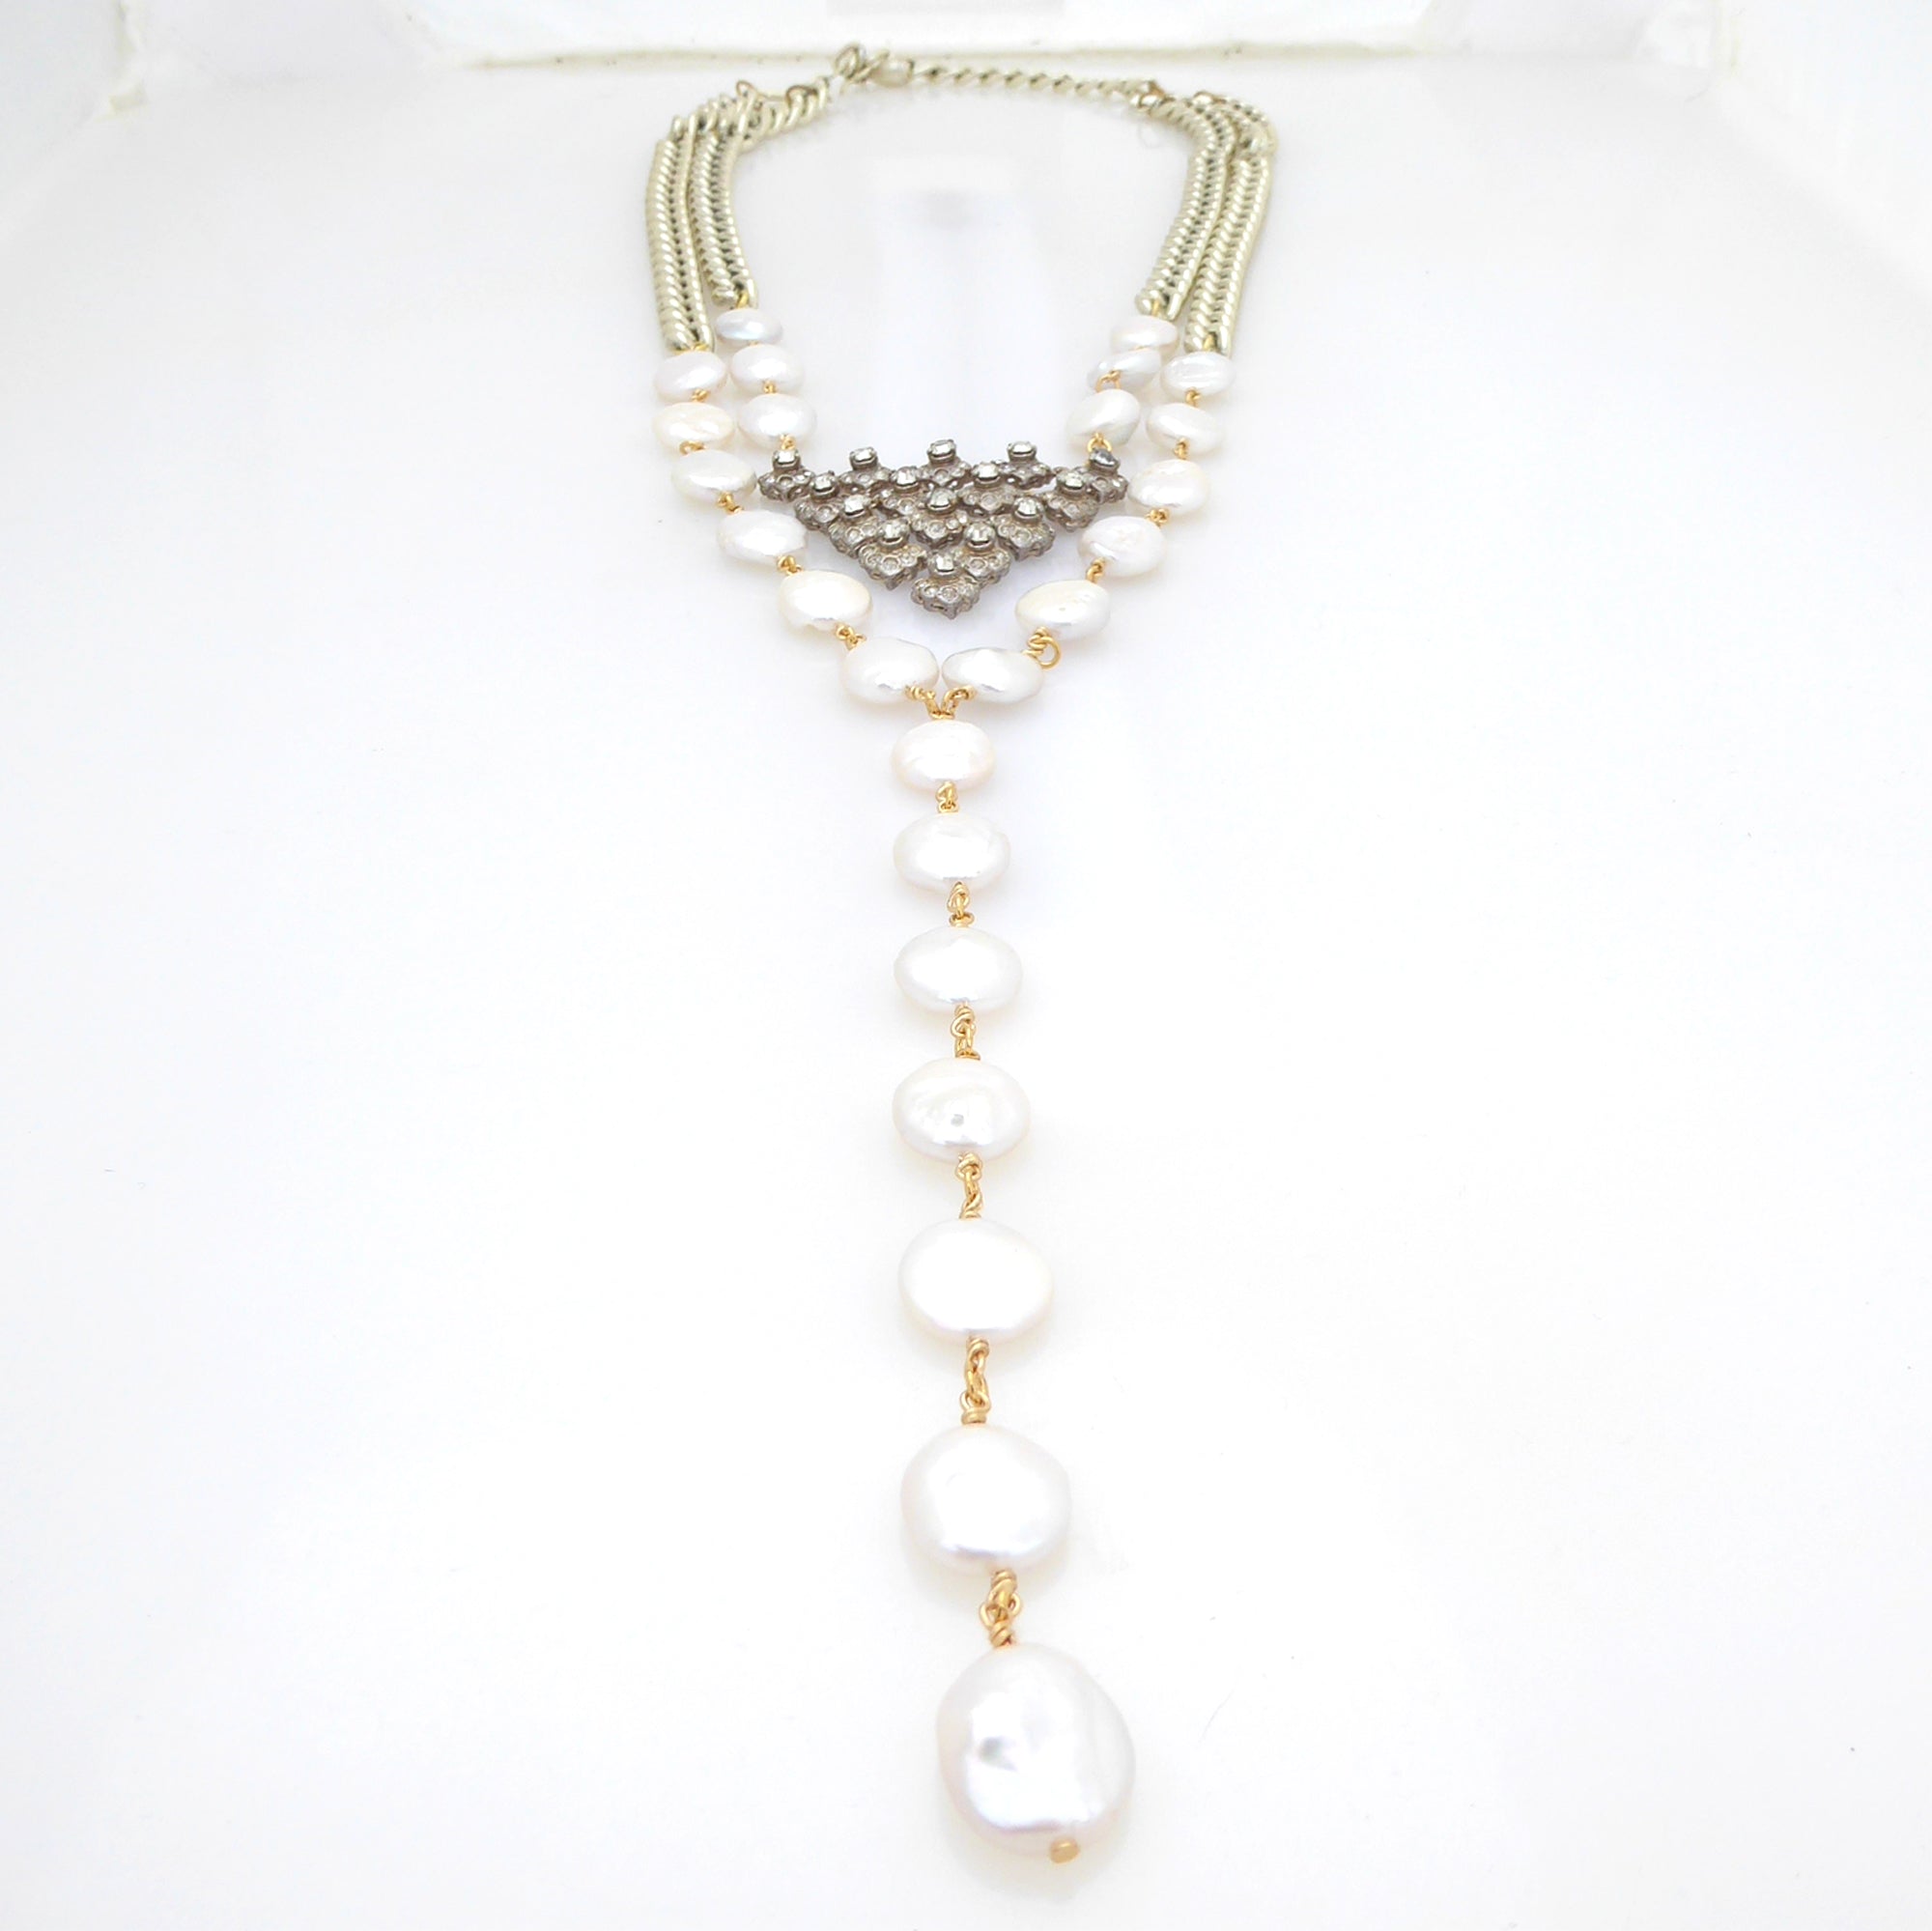 Celestial freshwater pearl and rhinestone necklace by Jenny Dayco 3